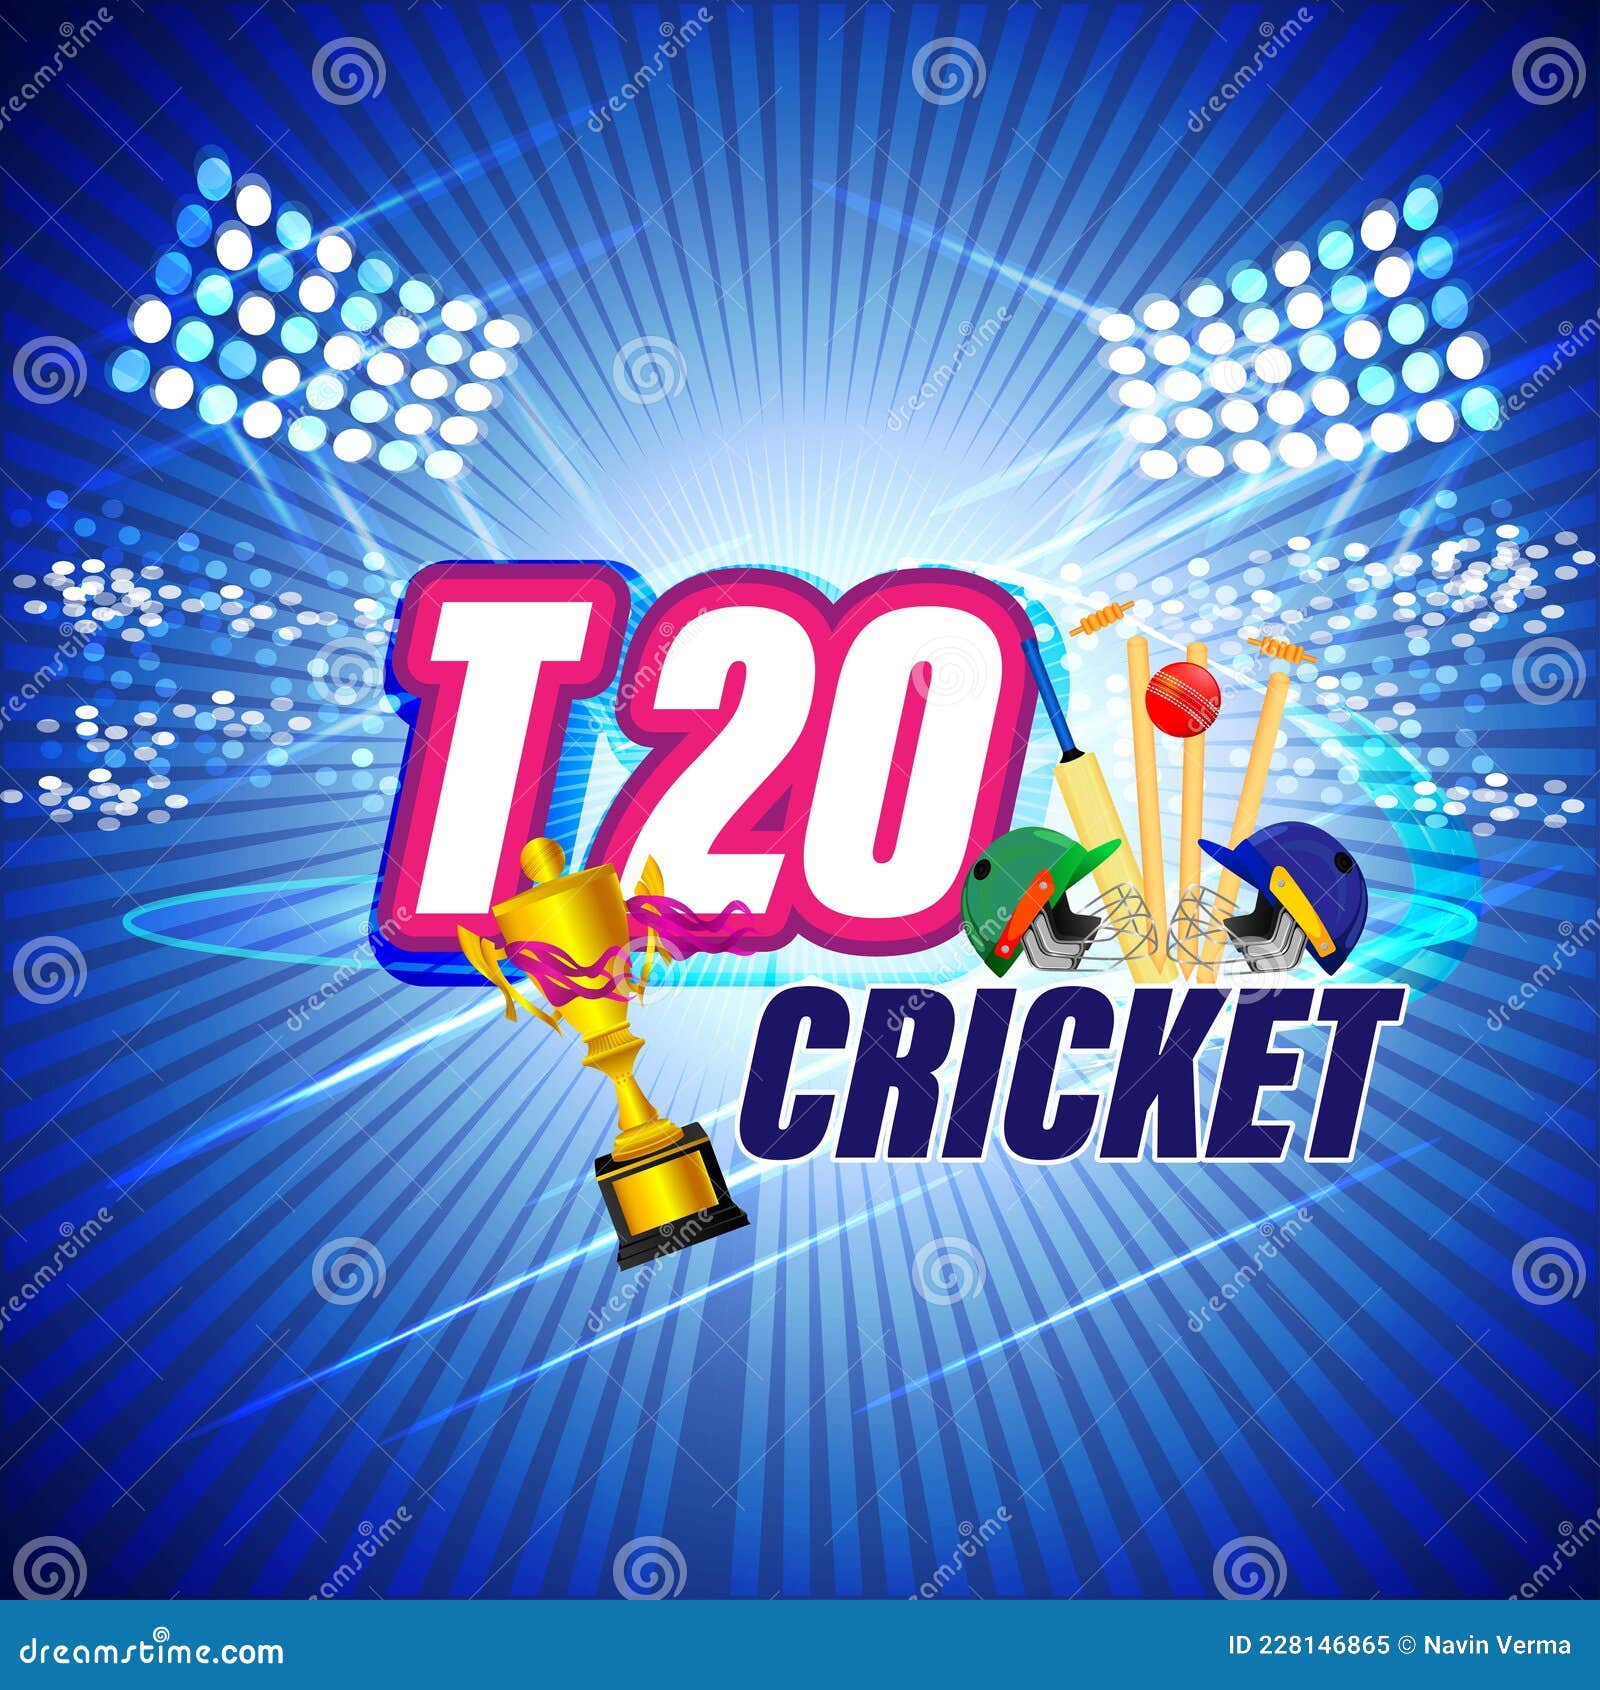 Live Cricket Telecast Video Player Stock Illustration By